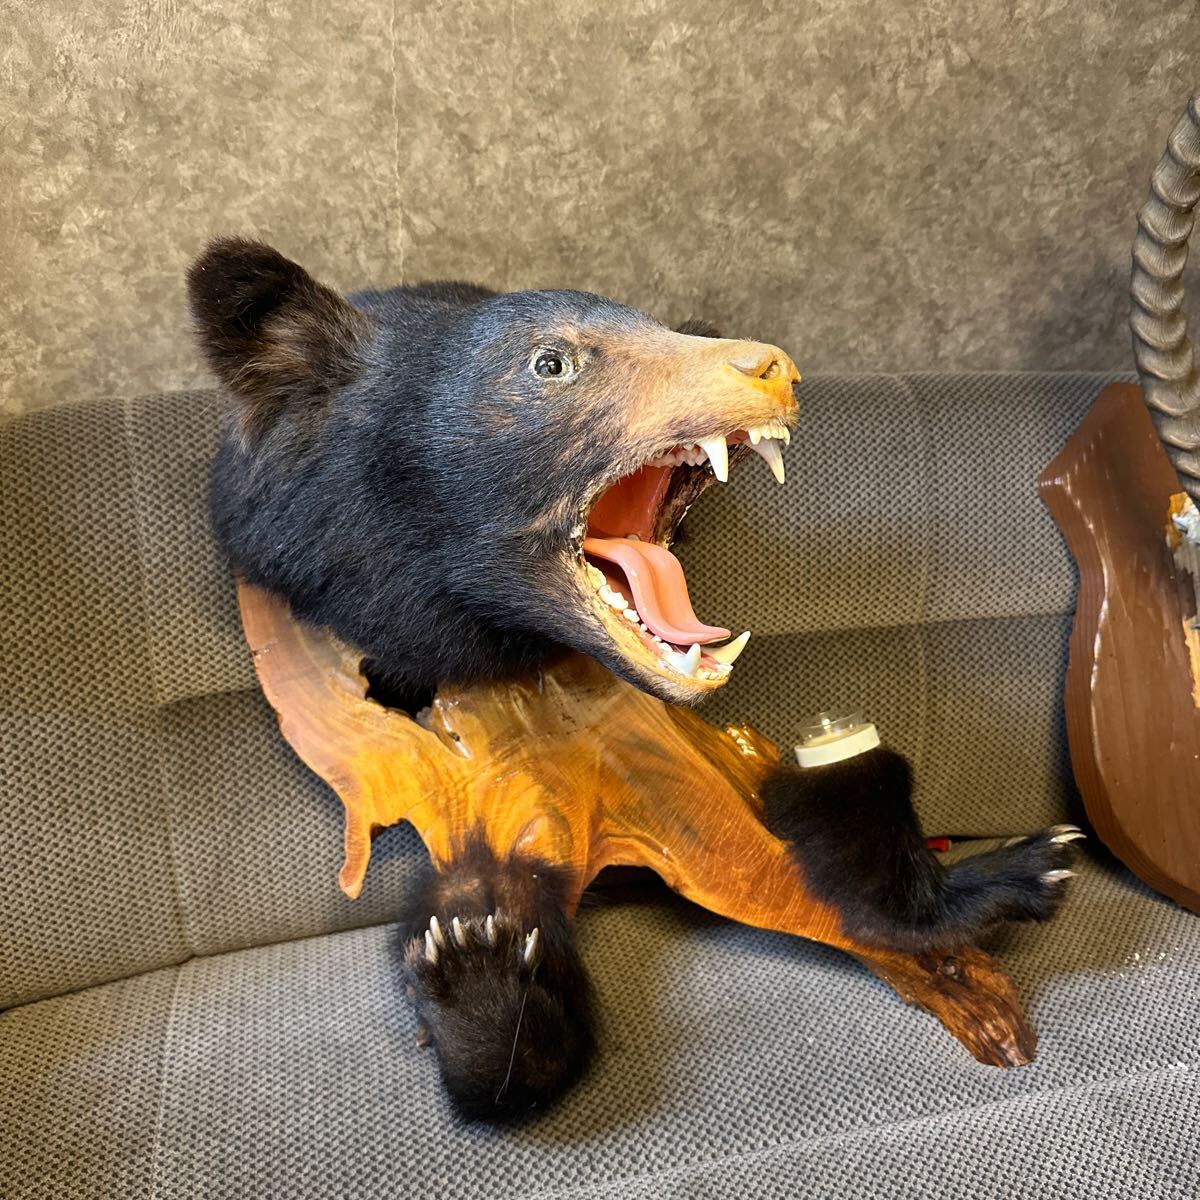  selling out exist nowagma peeling made bear interior specimen is . made 